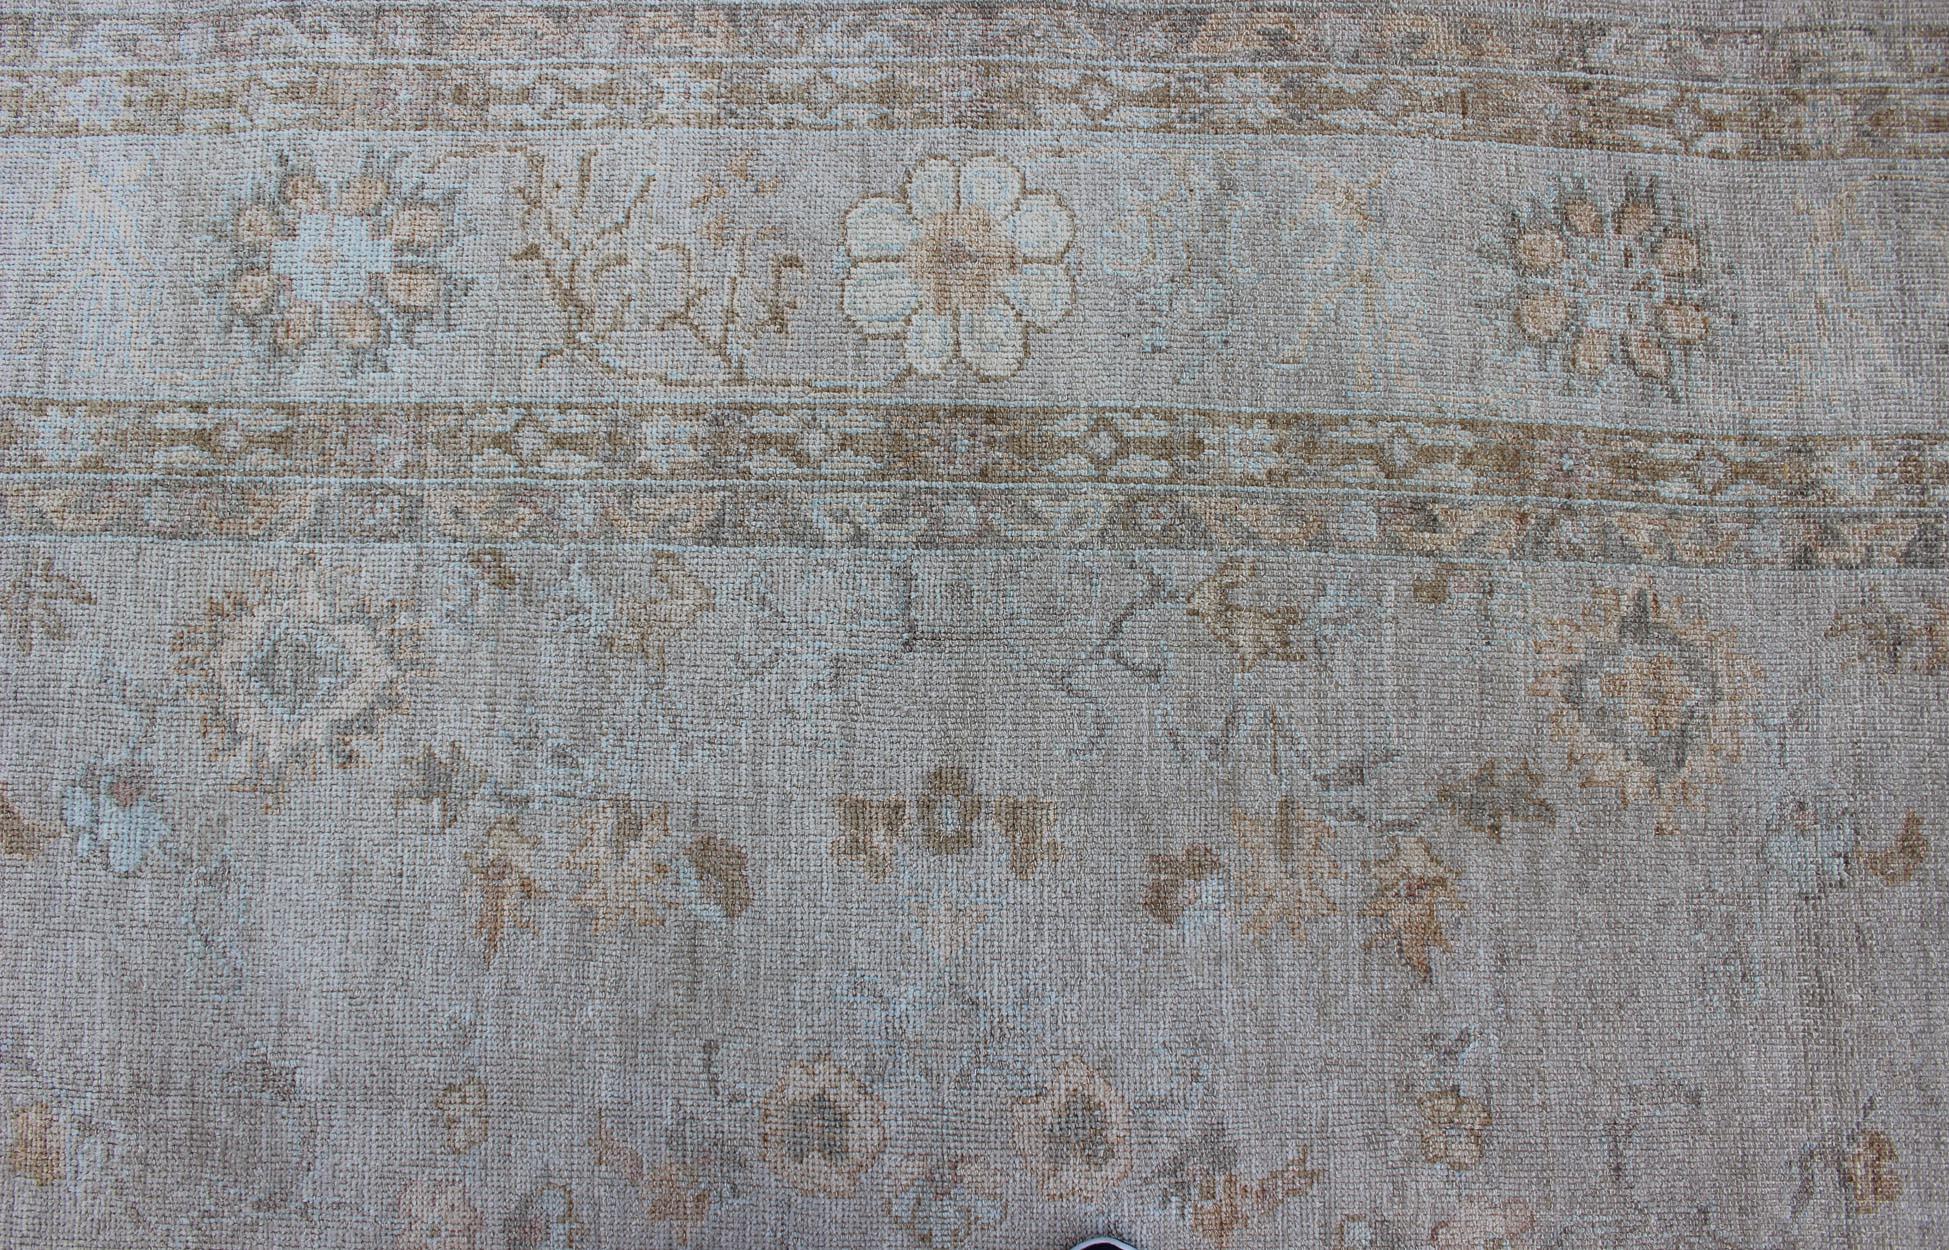 Large Turkish Angora Oushak Rug with All-Over Vining Floral Design in Neutral Co For Sale 9